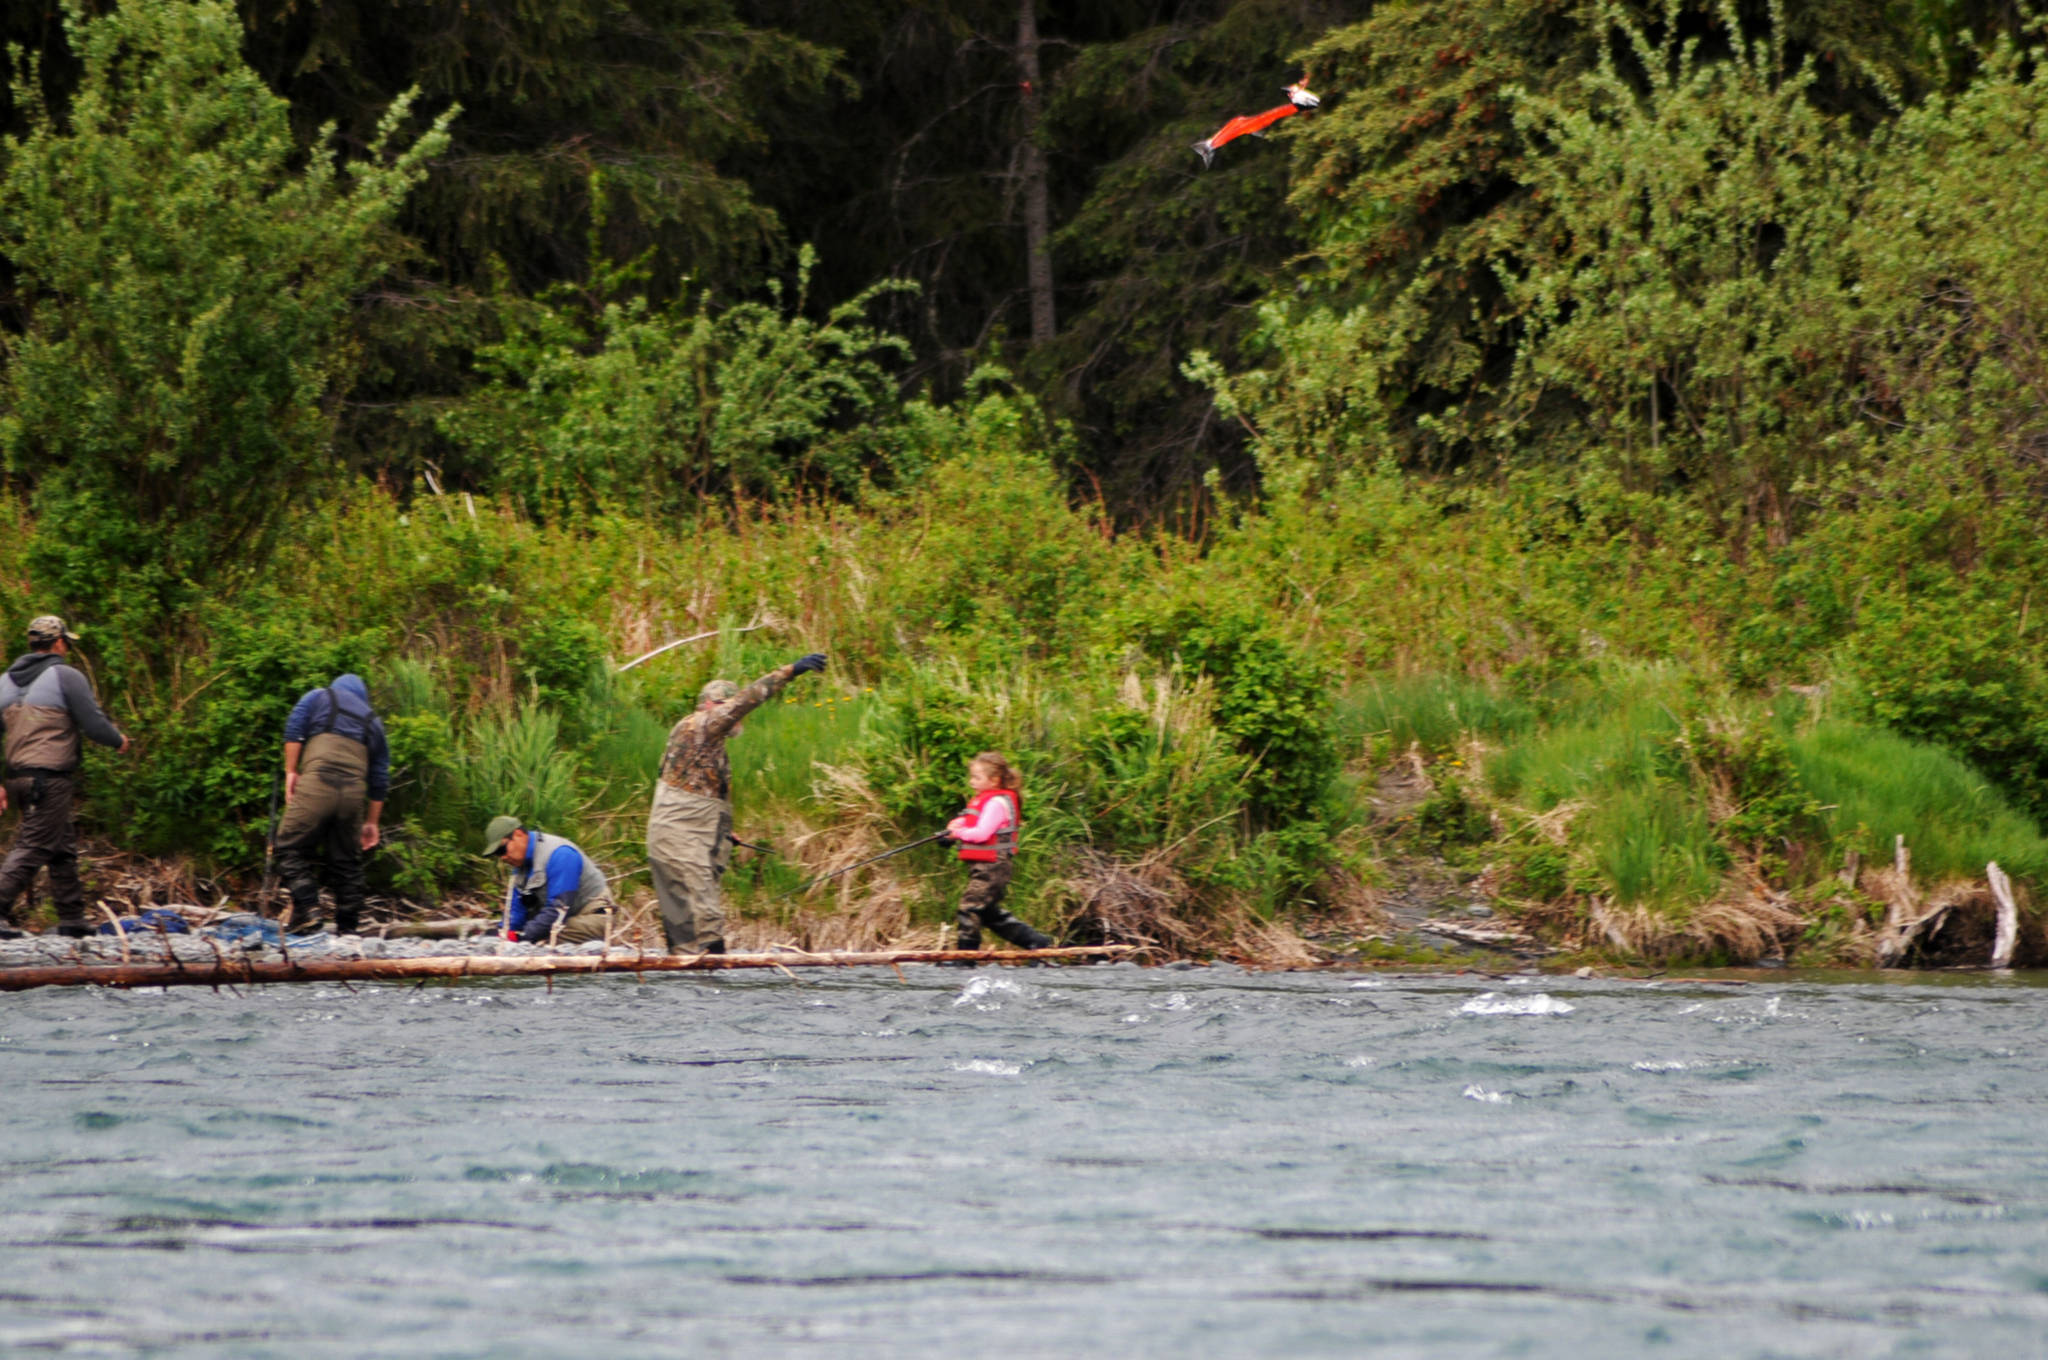 A successful angler pitches the remains of a filleted sockeye salmon out into the fast-flowing waters of the Kenai River downstream of the confluence with the Russian River on Sunday, June 11, 2017 near Cooper Landing, Alaska. Sunday was the first opening for the popular Russian River sockeye salmon sportfishery, and by midmorning, many anglers were already packing out their limits of salmon while others pulled in their catches. (Photo by Elizabeth Earl/Peninsula Clarion)